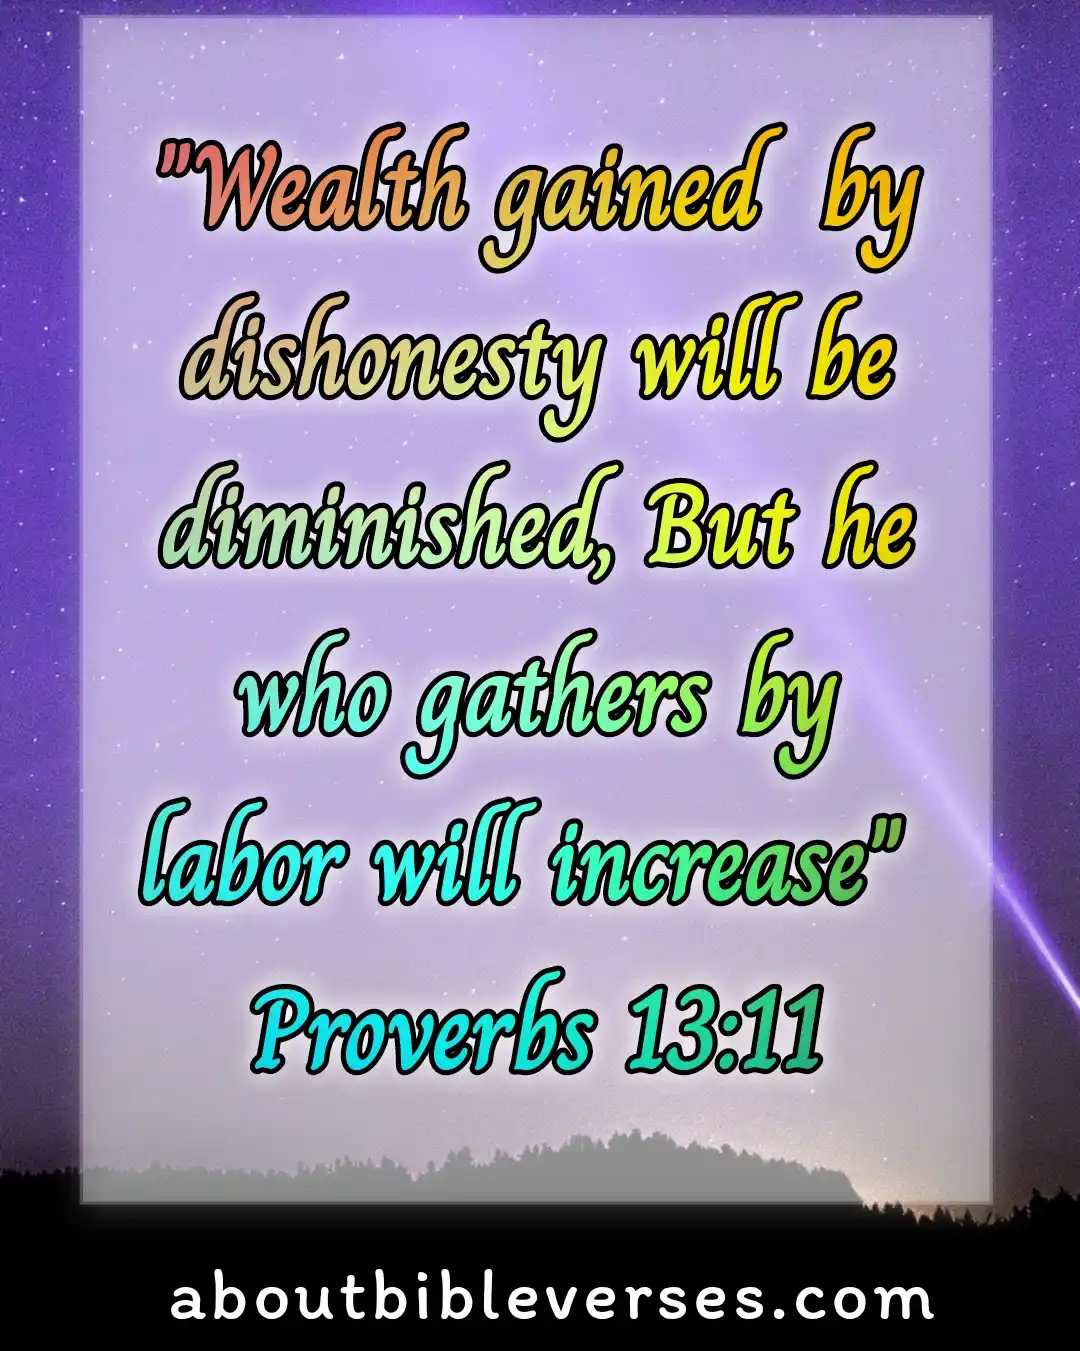 Bible Verses For scammer, Fraud And Misleading (Proverbs 13:11)